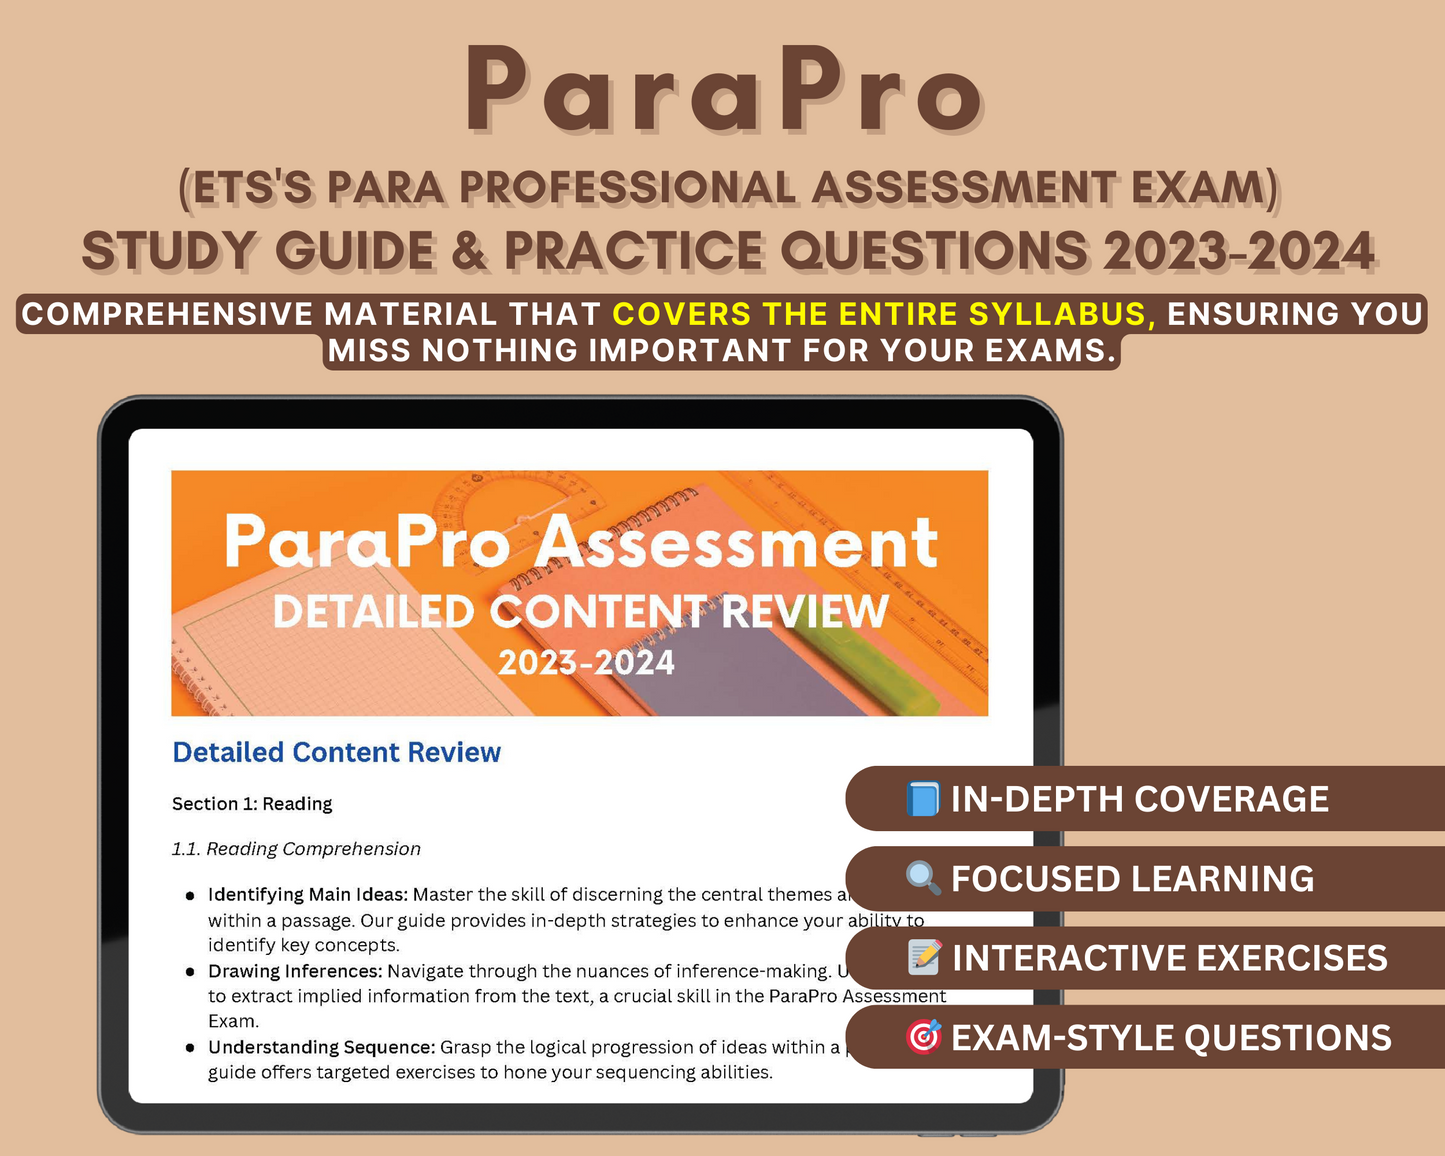 ParaPro Assessment Study Guide 2023-2024: In-Depth Content Review & Practice Tests for Reading, Writing, and Math